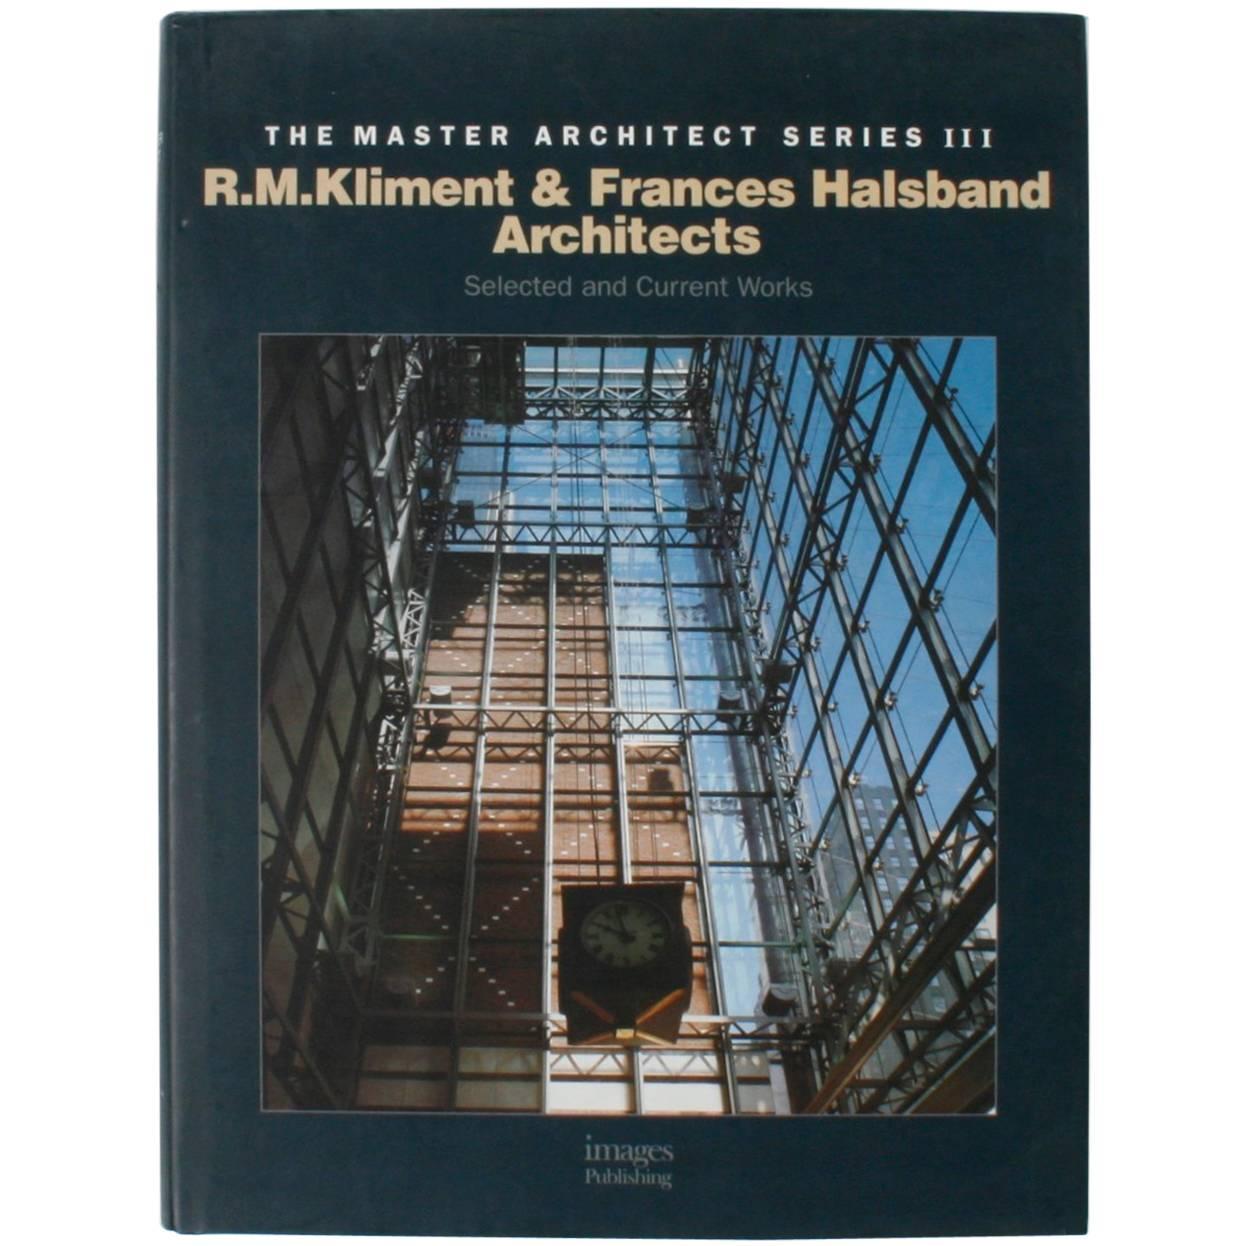 The Master Architect Series III, R.M. Kliment & Frances Halsband Architects